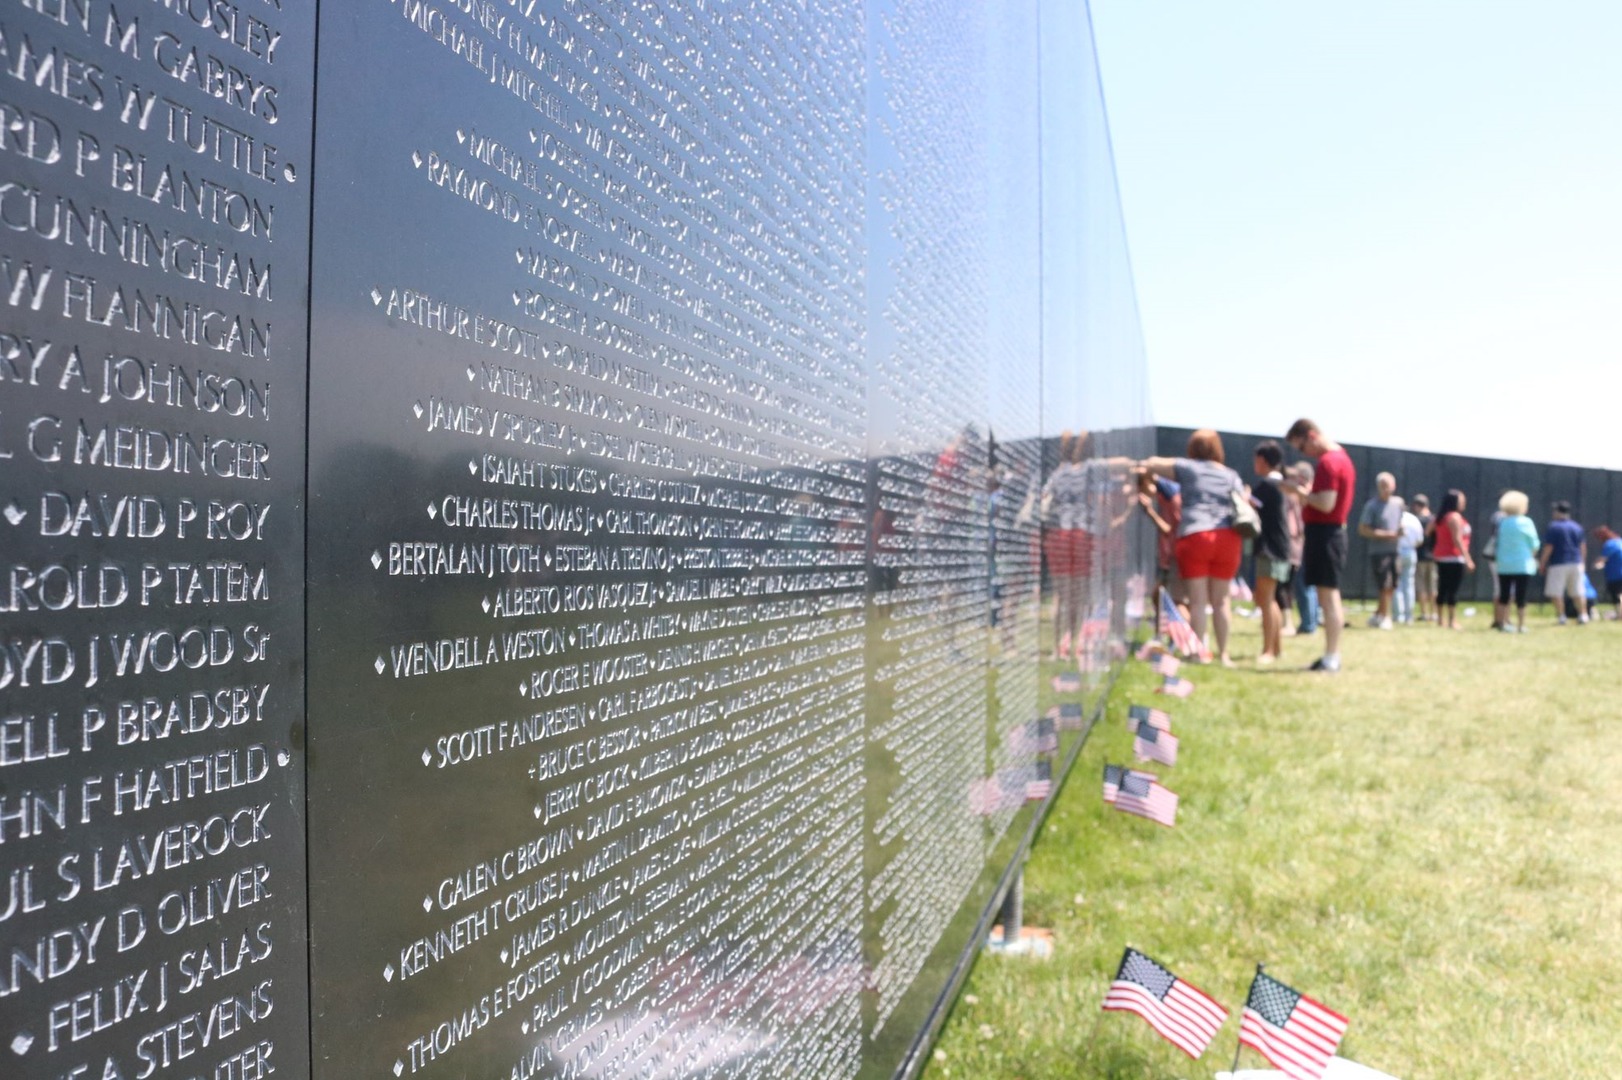 The Wall That Heals, a replica of the Vietnam Veterans Memorial in Washington D.C., was escorted by motorcyclists across multiple towns including Huntley